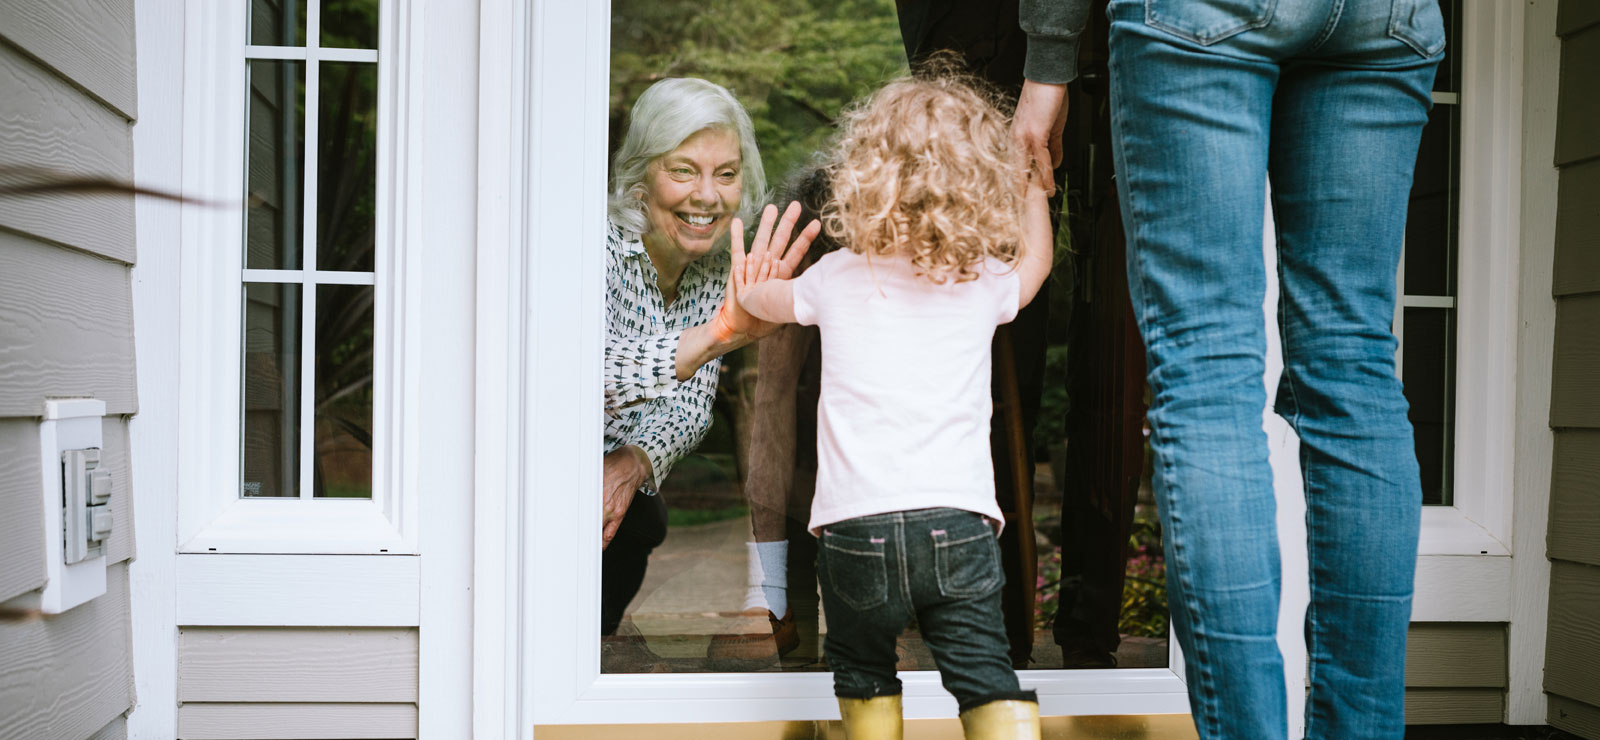 Grandma standing behind glass door puts hand against door while granddaughter on the other side of the door does the same thing.